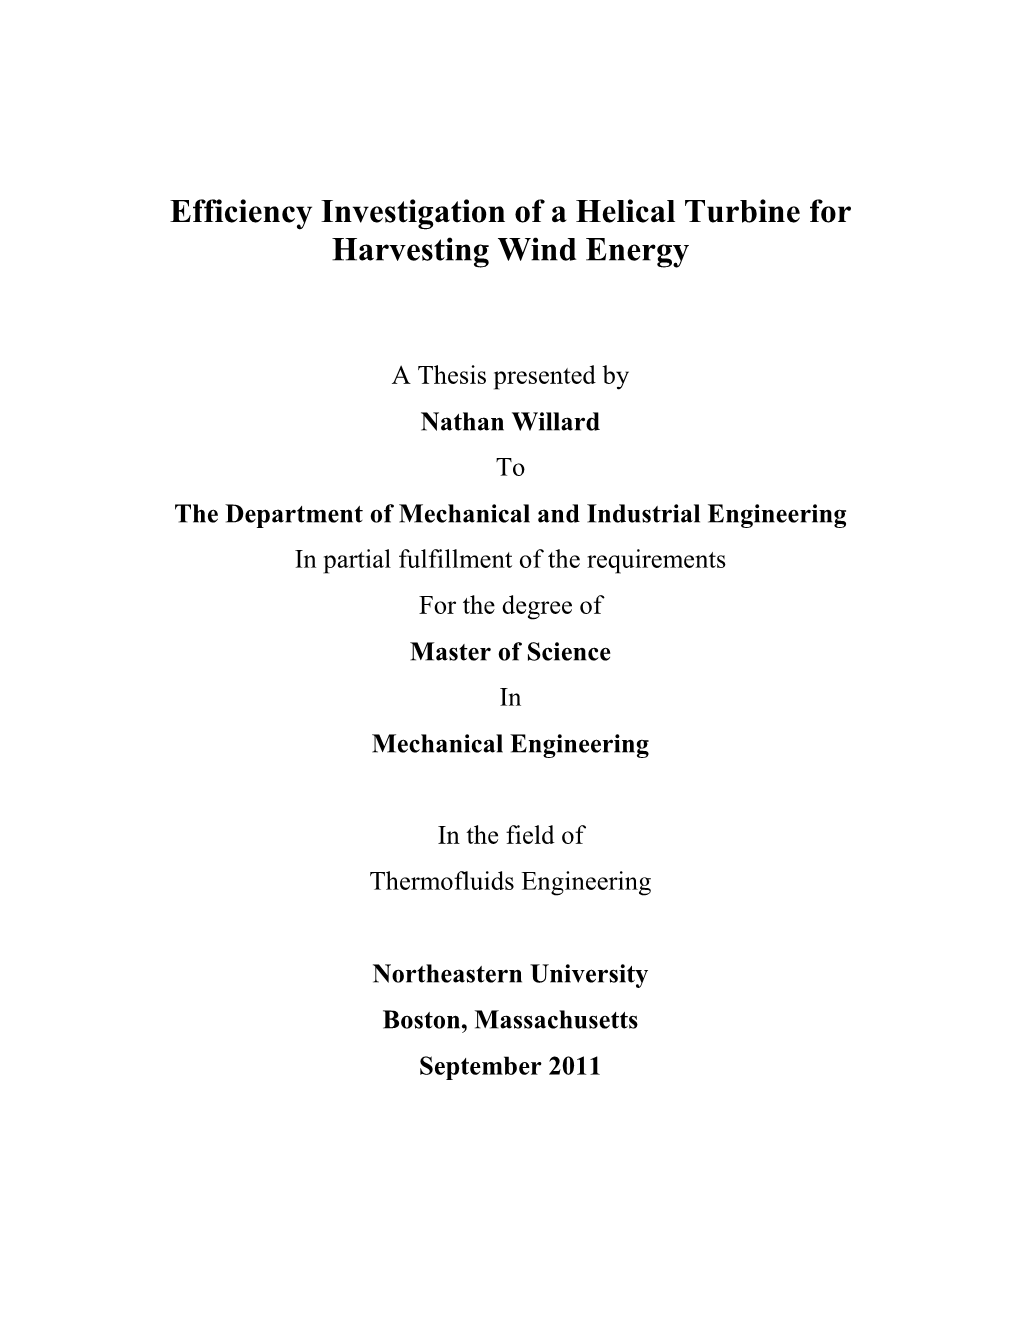 Efficiency Investigation of a Helical Turbine for Harvesting Wind Energy